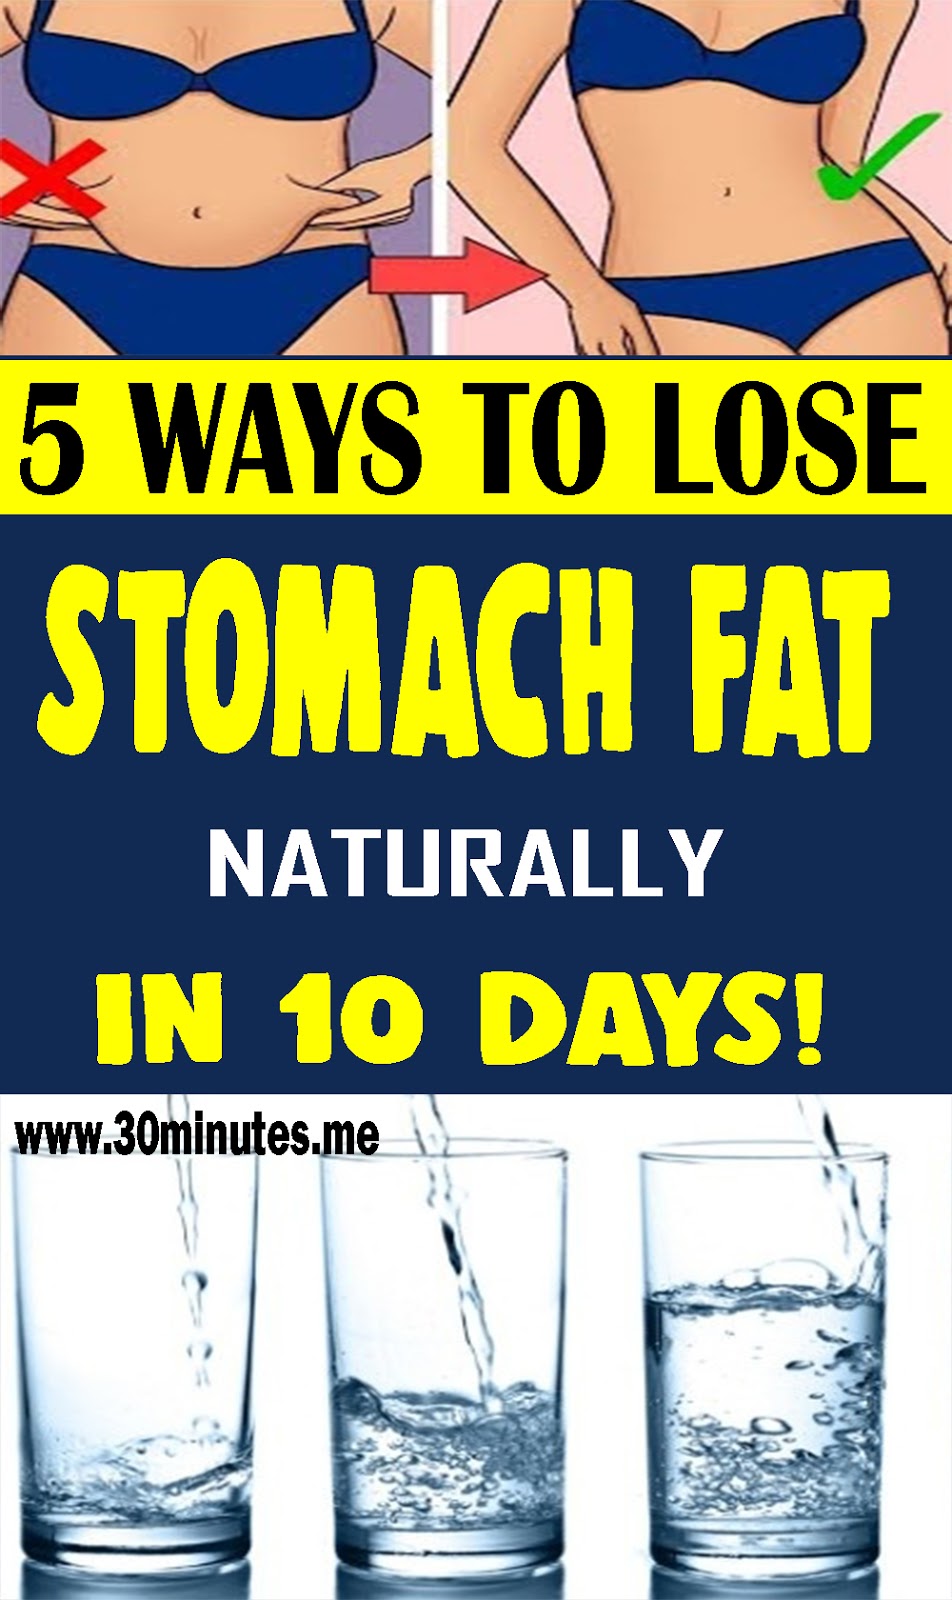 How Do I Lose Belly Fat In 10 Days Naturally ! - natural health Center